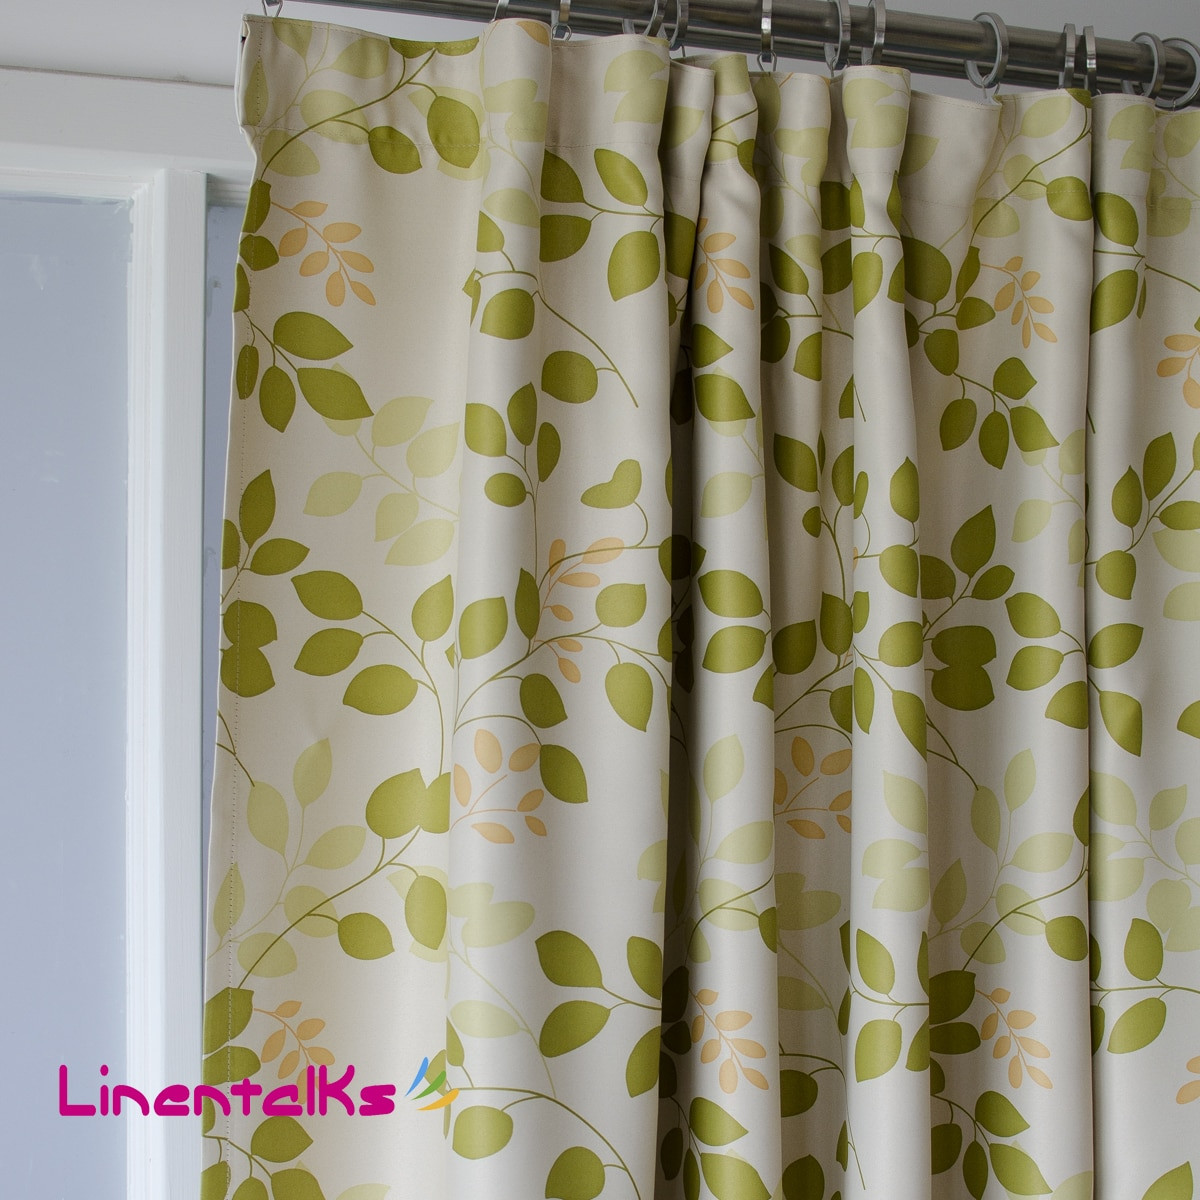 Green Living Room Curtains
 Blackout Green leave living room curtain Finished curtain